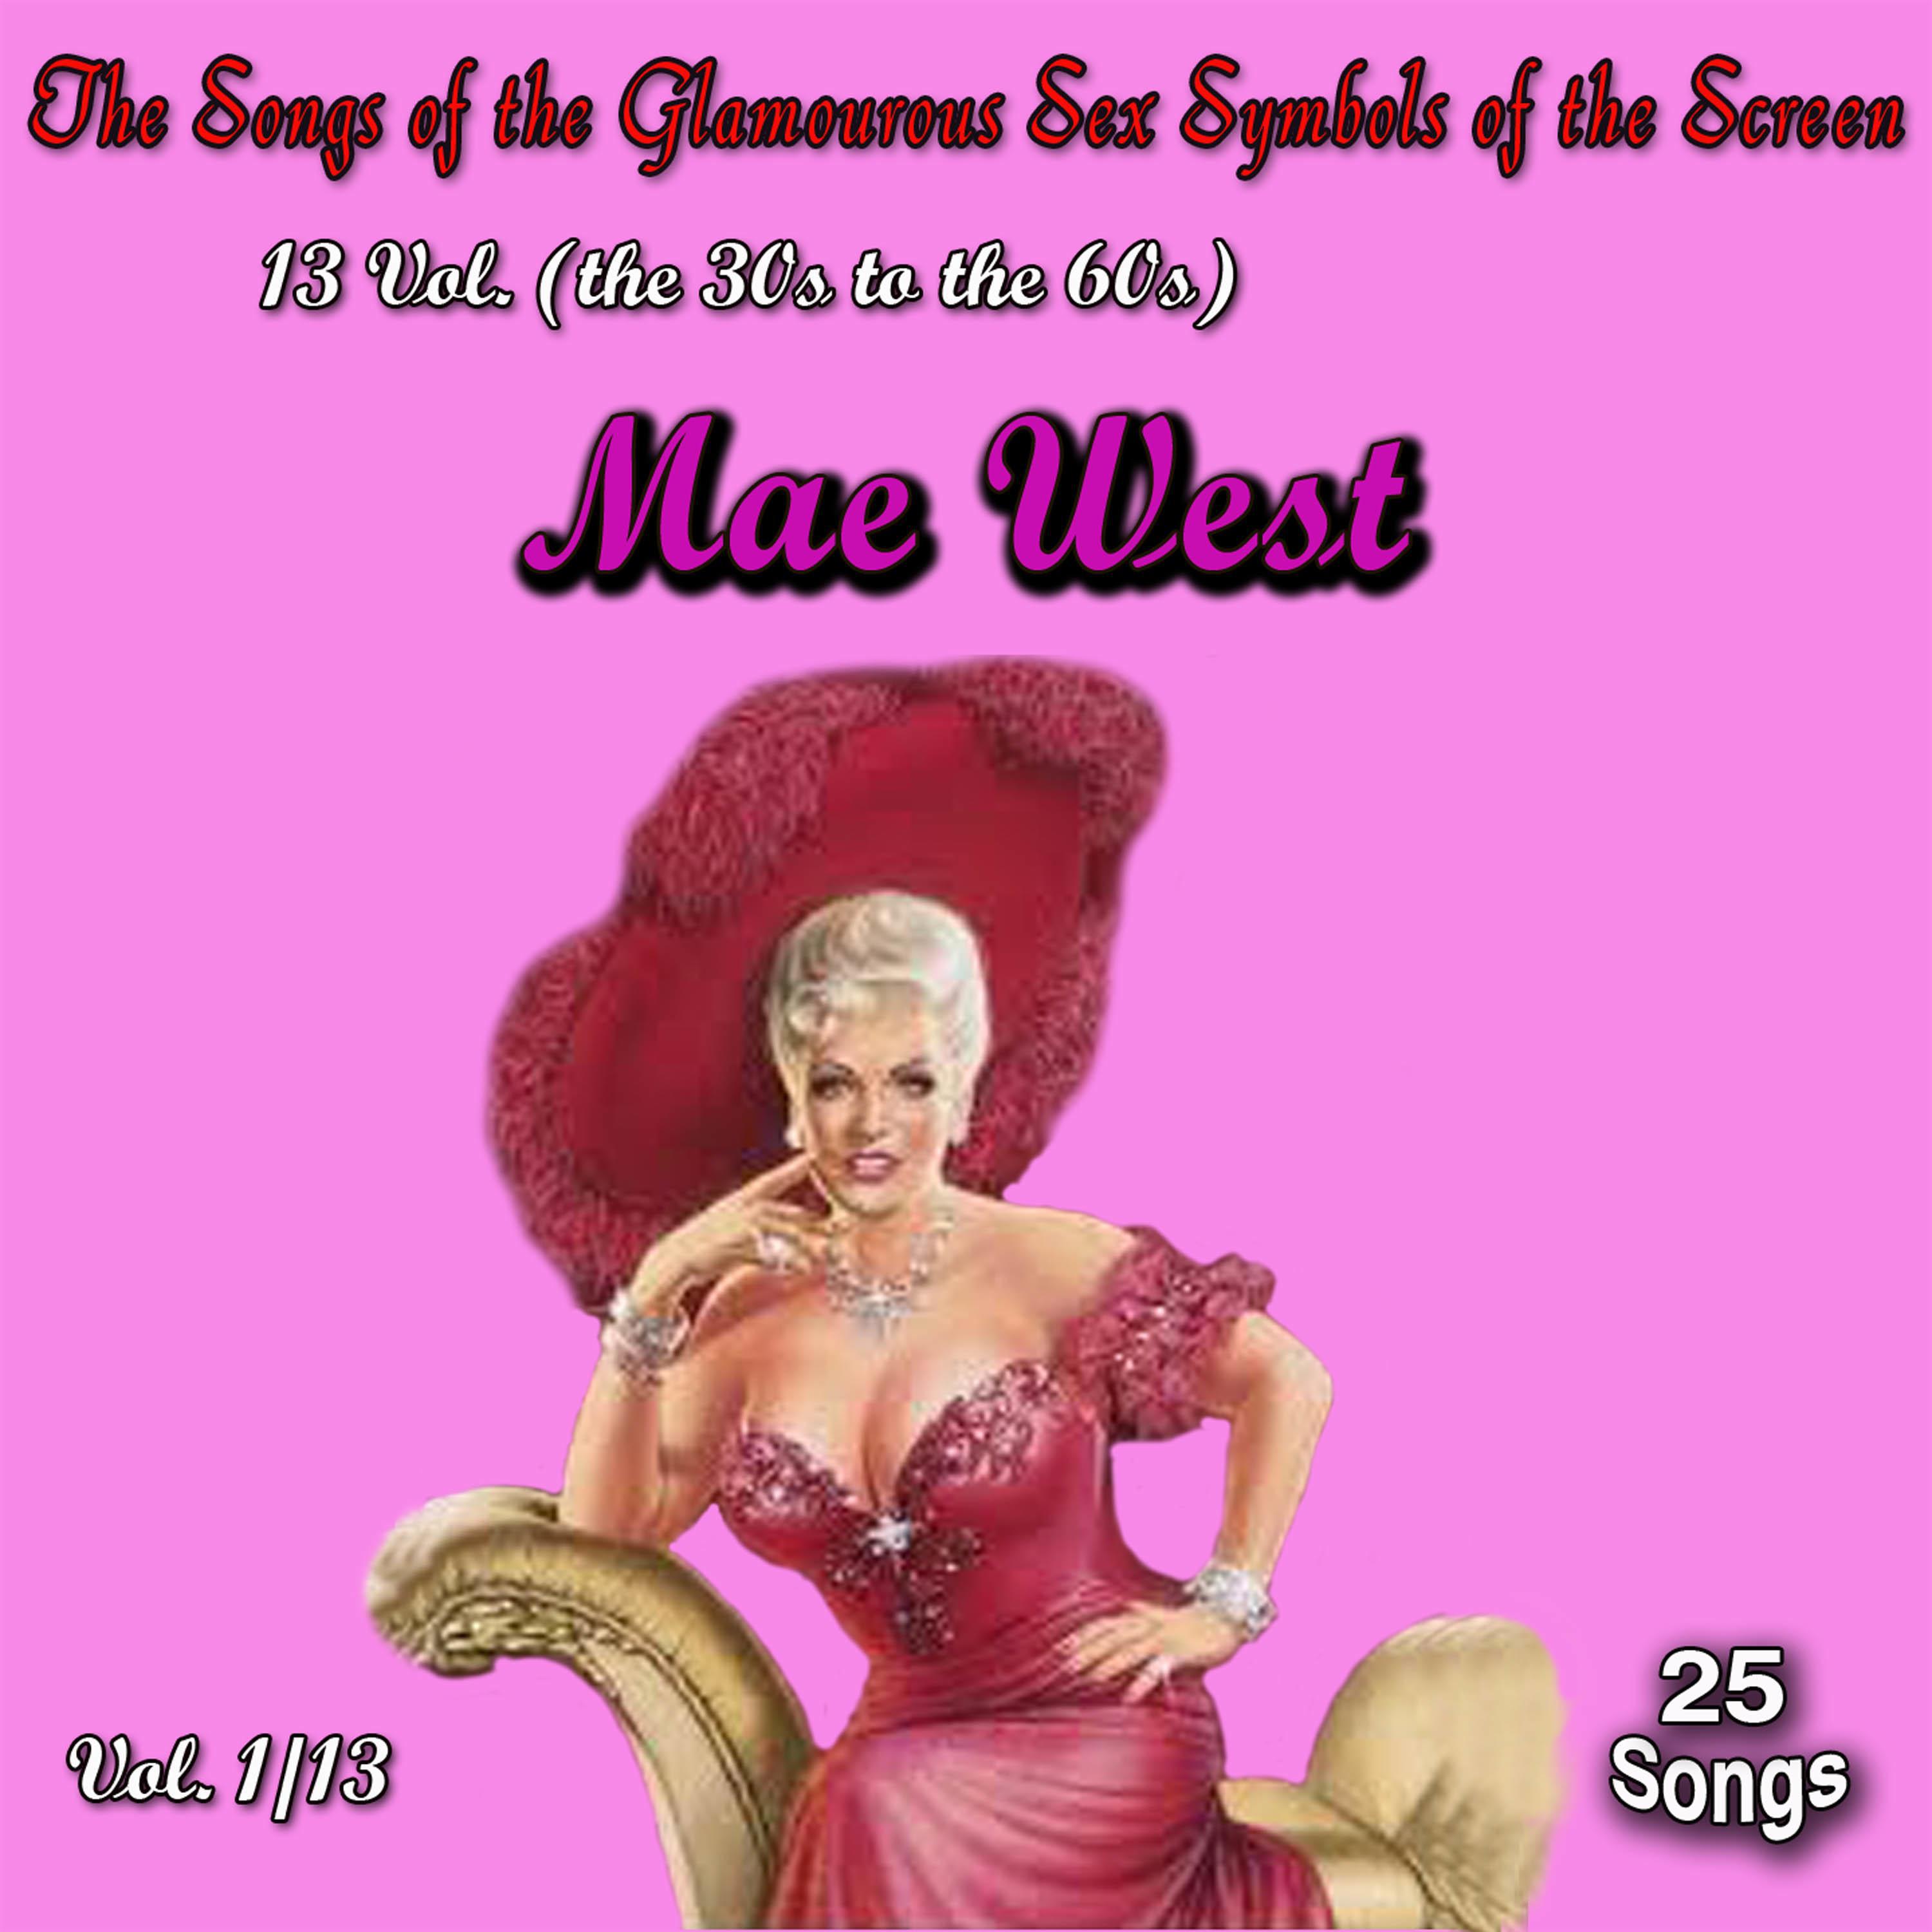 The Songs of the Glamourous Sex Symbols of the Screen in 13 Volumes - Vol. 1 / Mae West